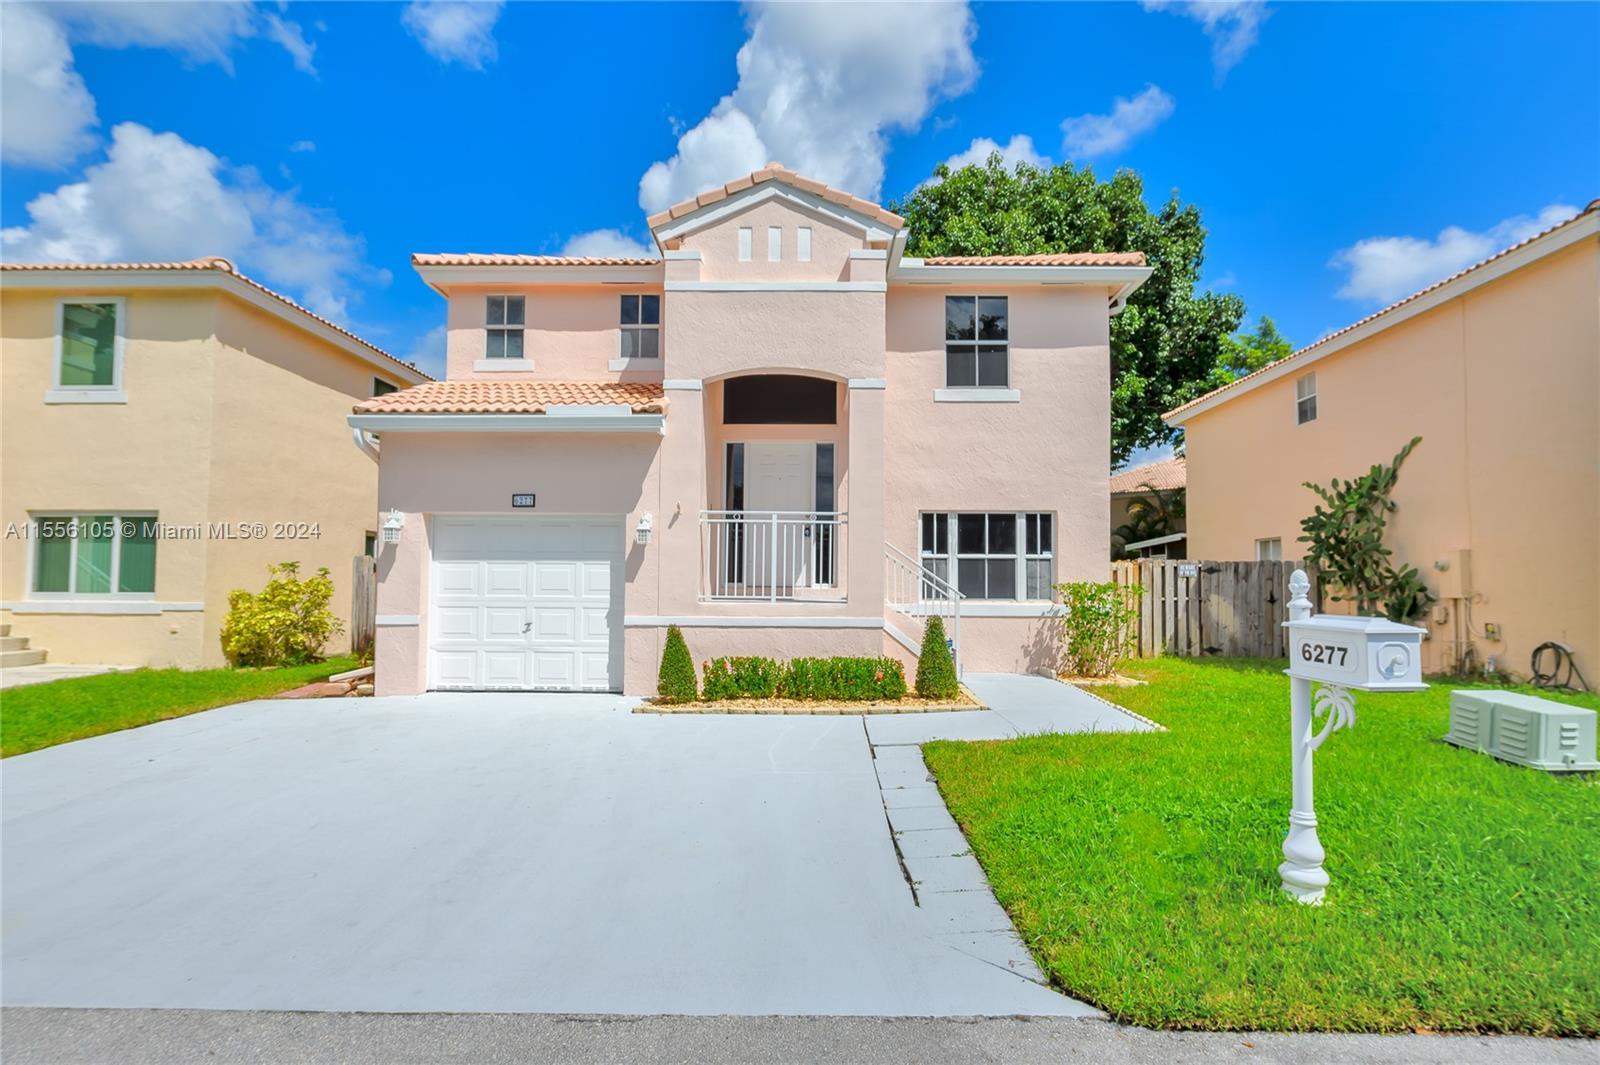 Photo of 6277 Duval Dr in Margate, FL